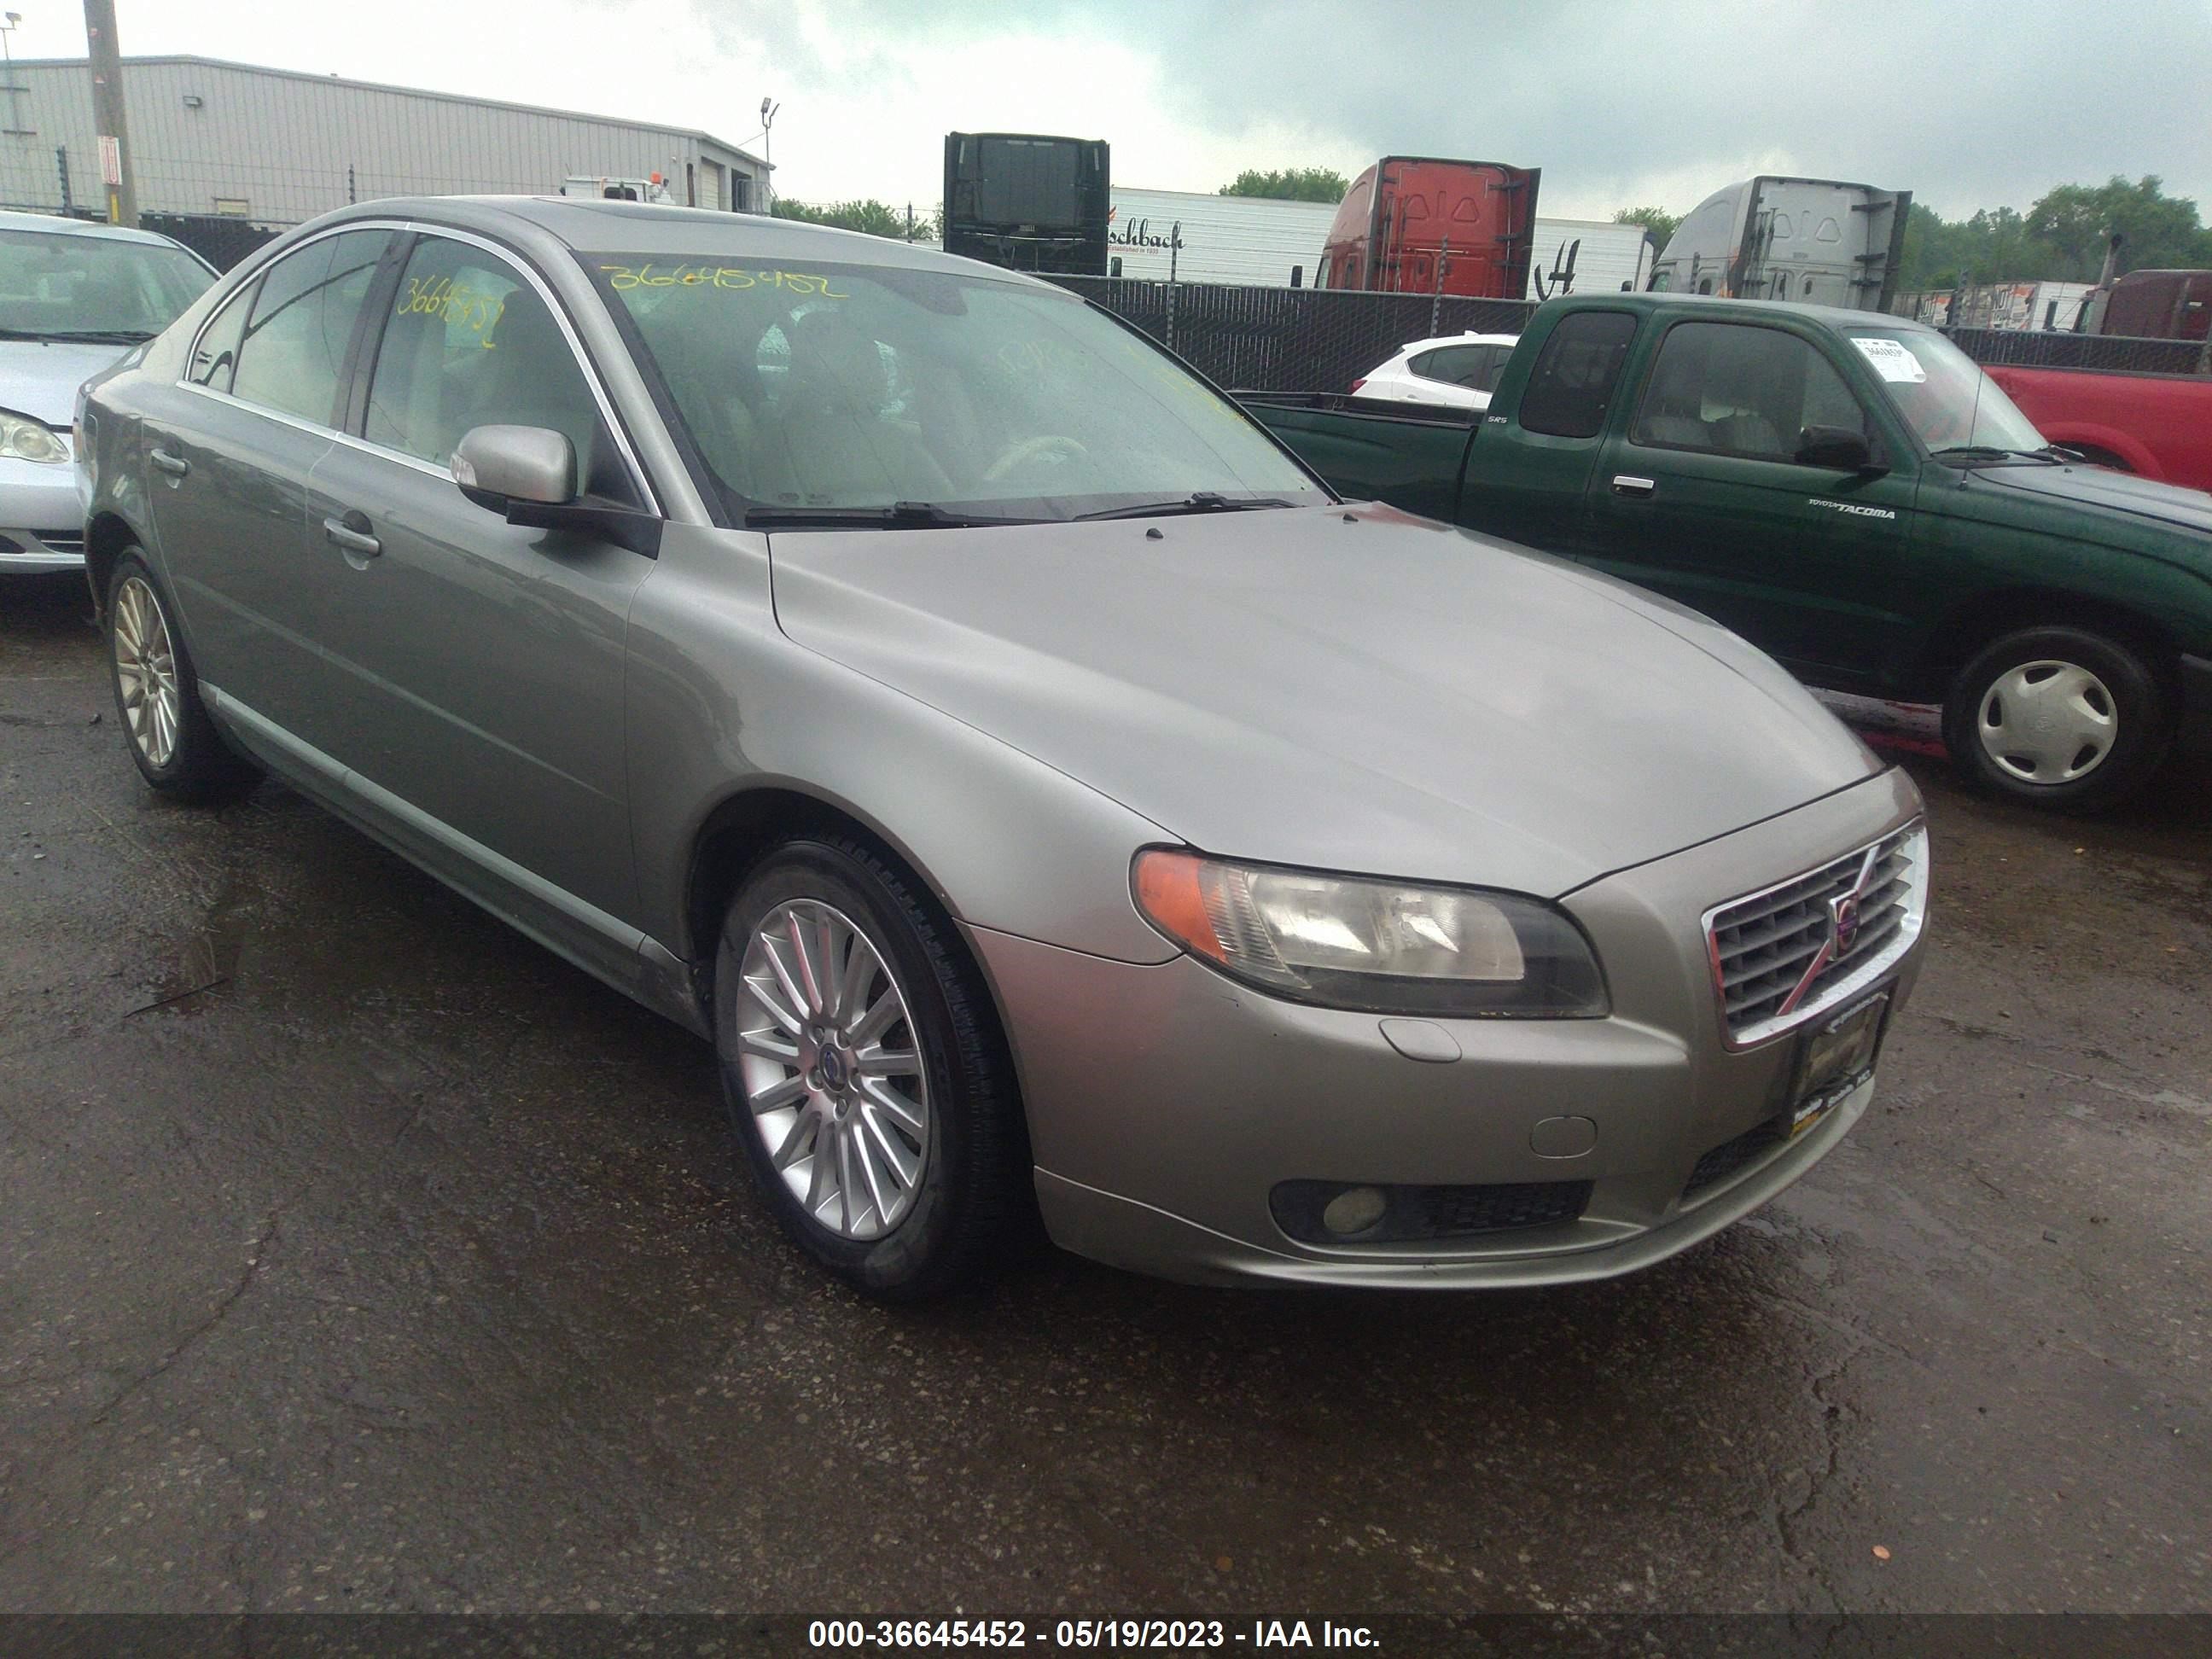 volvo s80 2007 yv1as982671030191